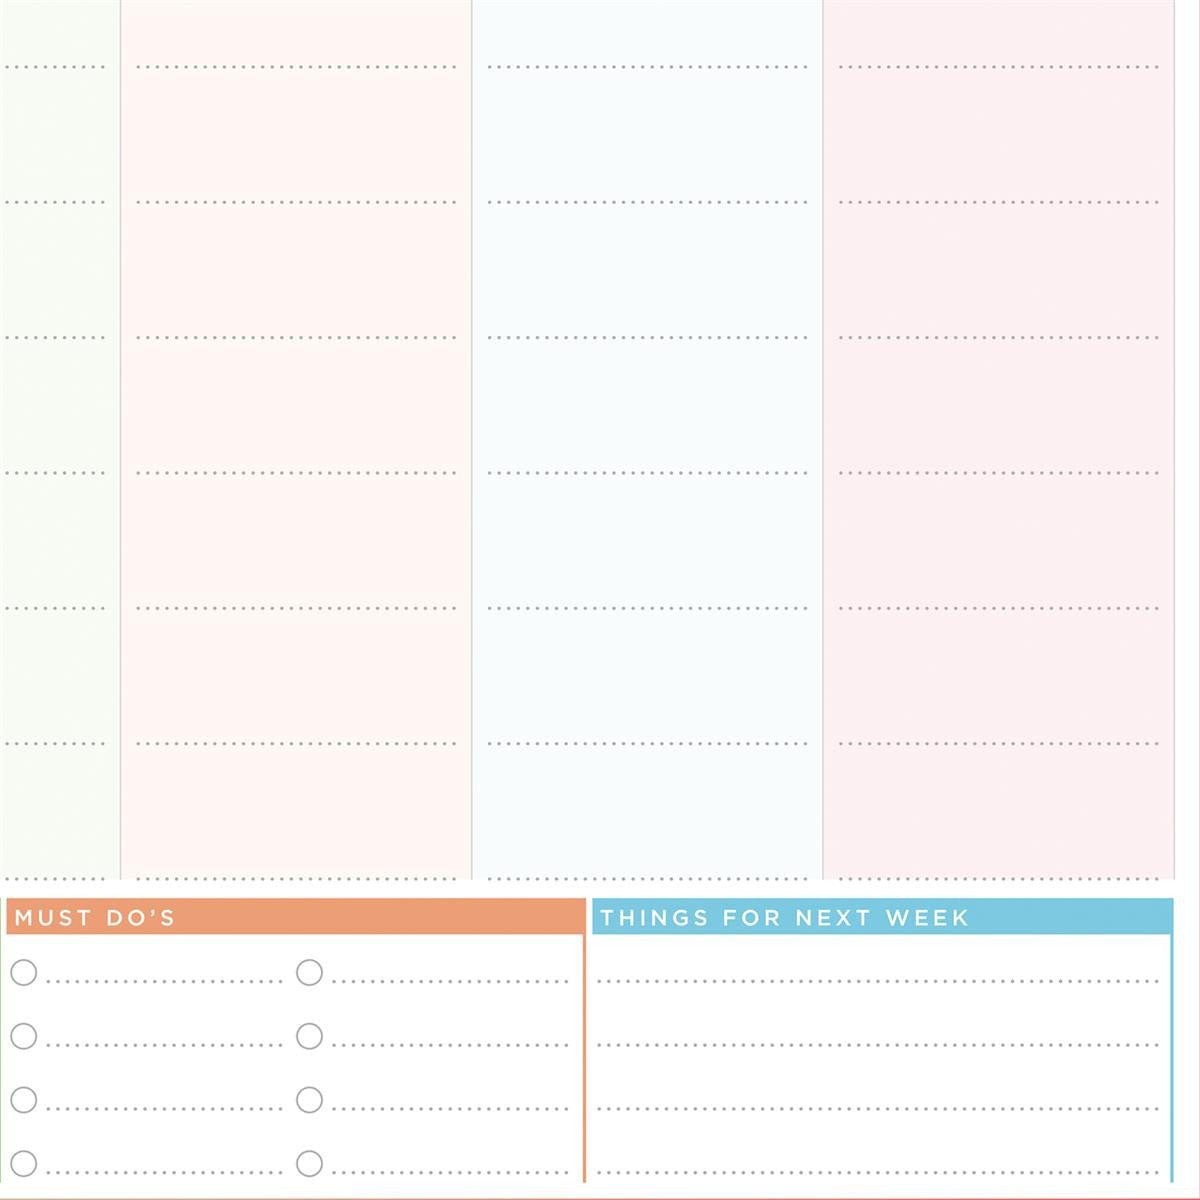 Wall Planner - Family Week Planner - Laminated Wall Planner